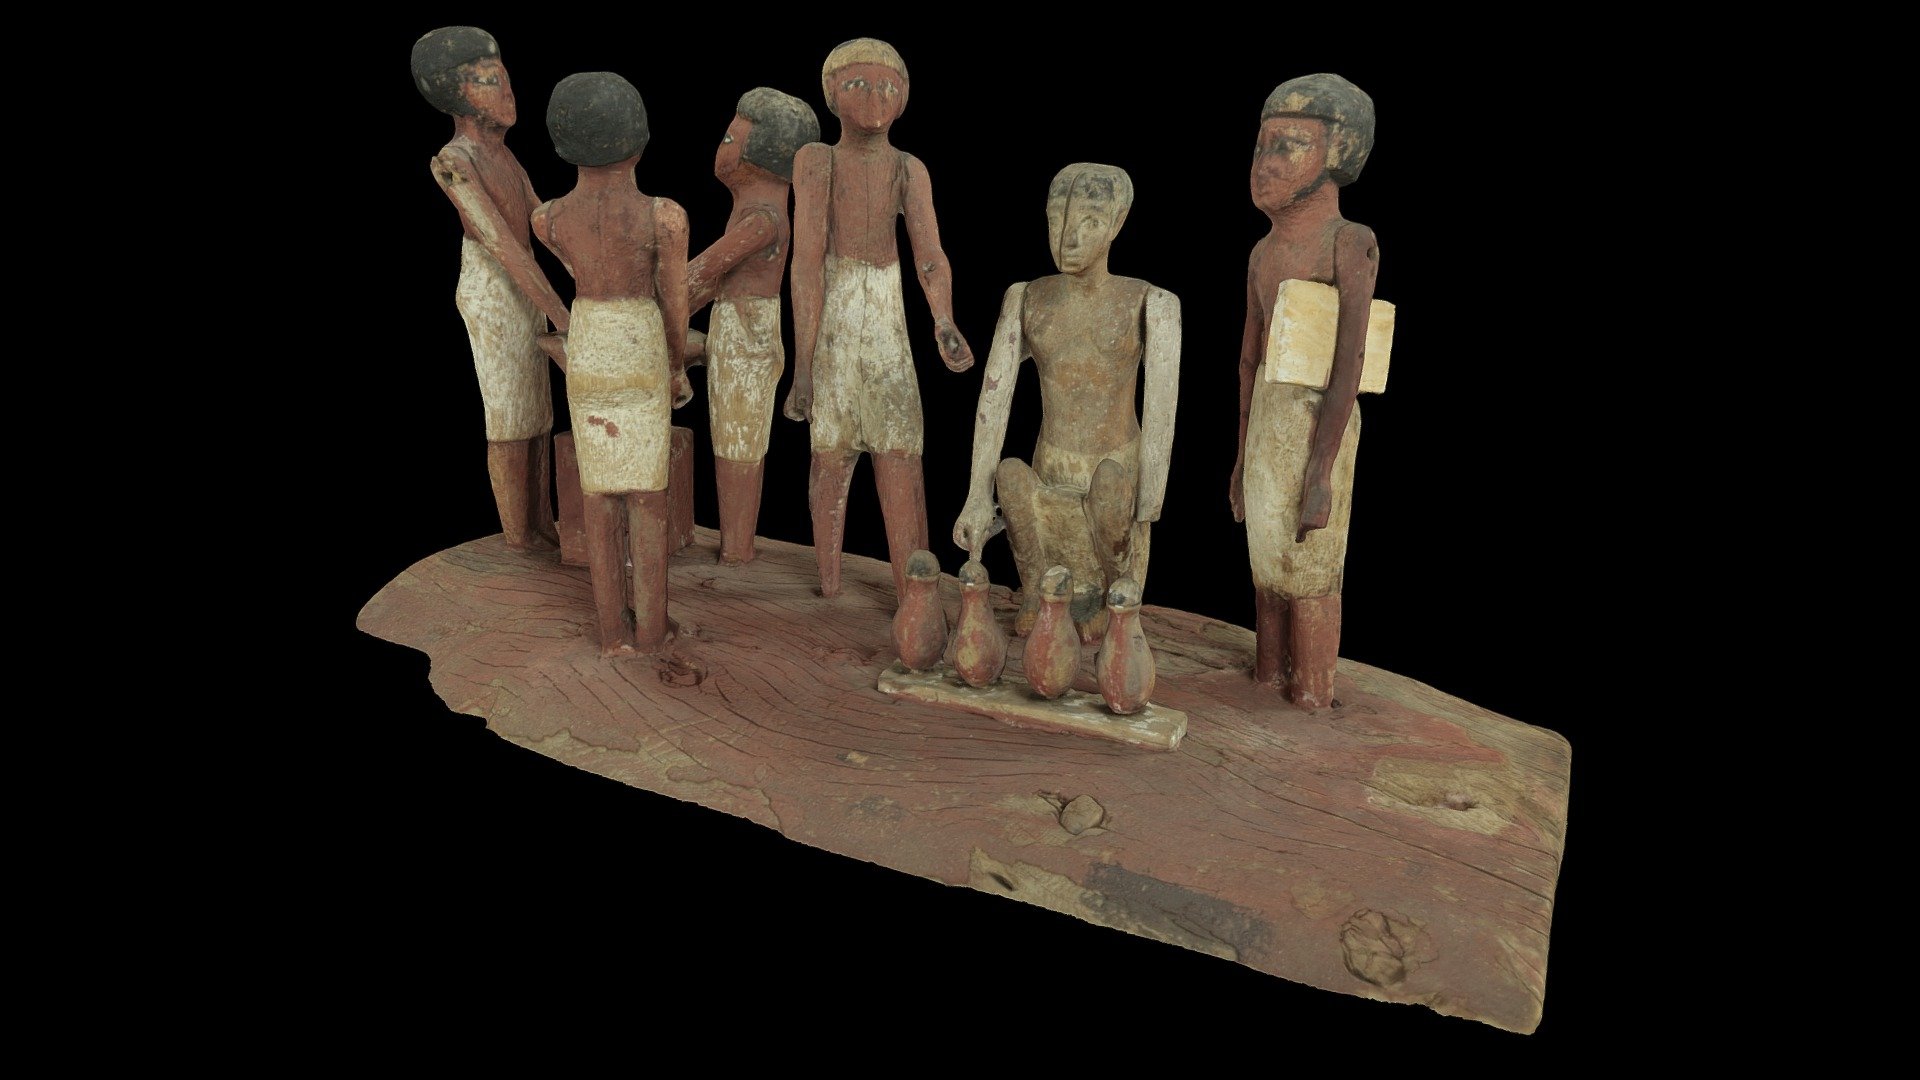 Beer was one of the staples of the ancient Egyptian diet and was a necessity for the Afterlife, as well. Tomb models such as this were as good as having live workers in the Afterlife. This model was included in a tomb to provide perpetual beer for the tomb owners.

Date: 2066-1650 BCE

3D model created in RealityCapture and Blender from 184 images taken on a Canon 5D Mark III by Joshua Norman 3d model